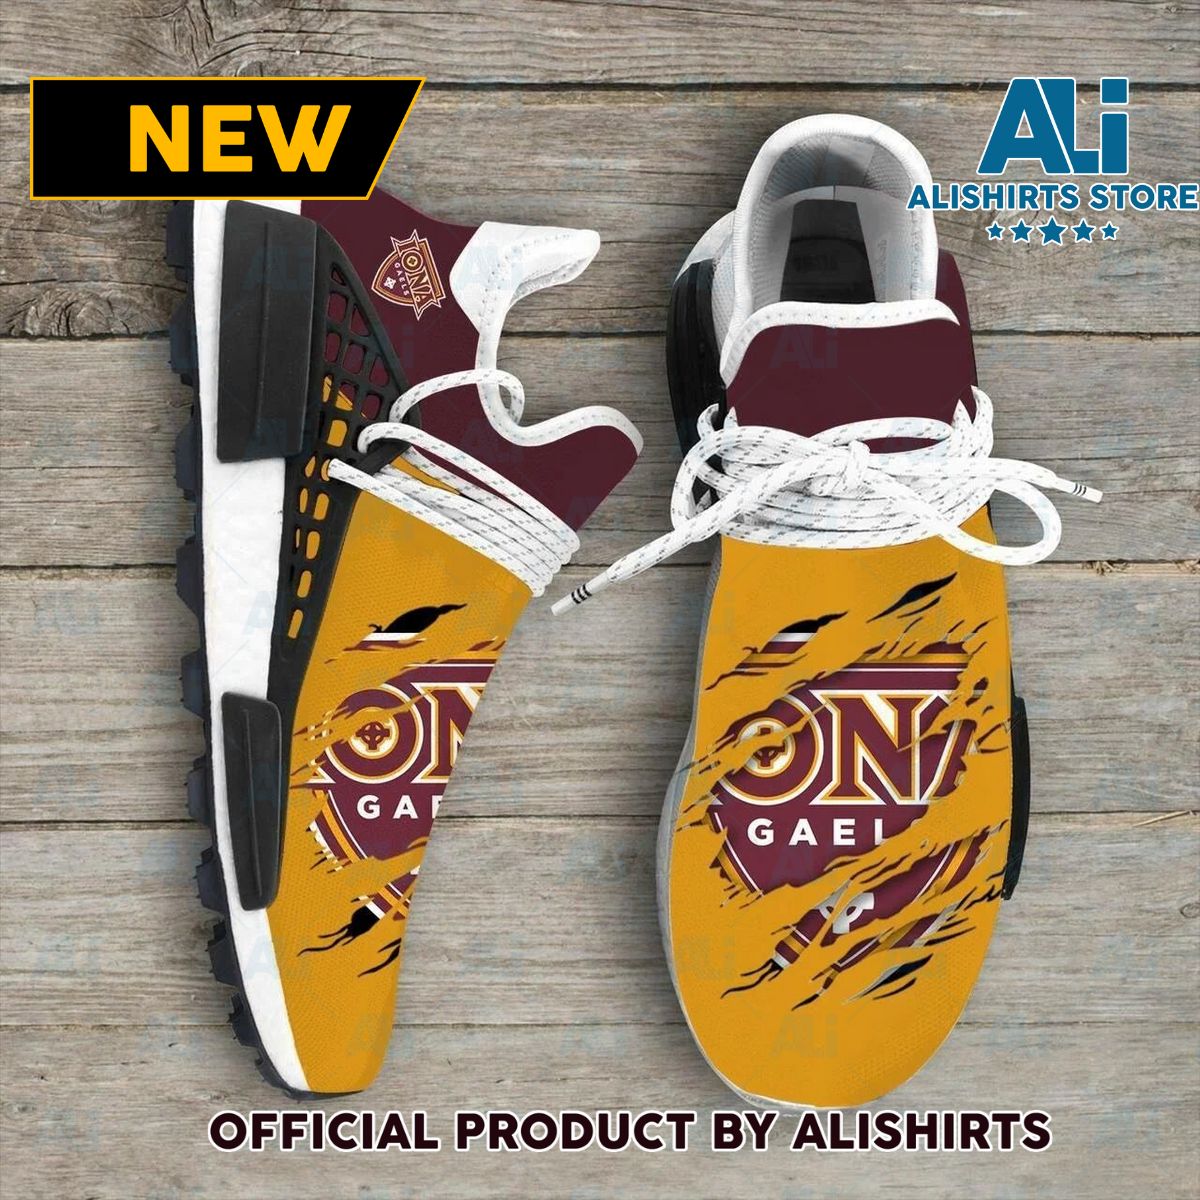 Iona College Gaels Ncaa NMD Human Race shoes Adidas NMD Sneakers